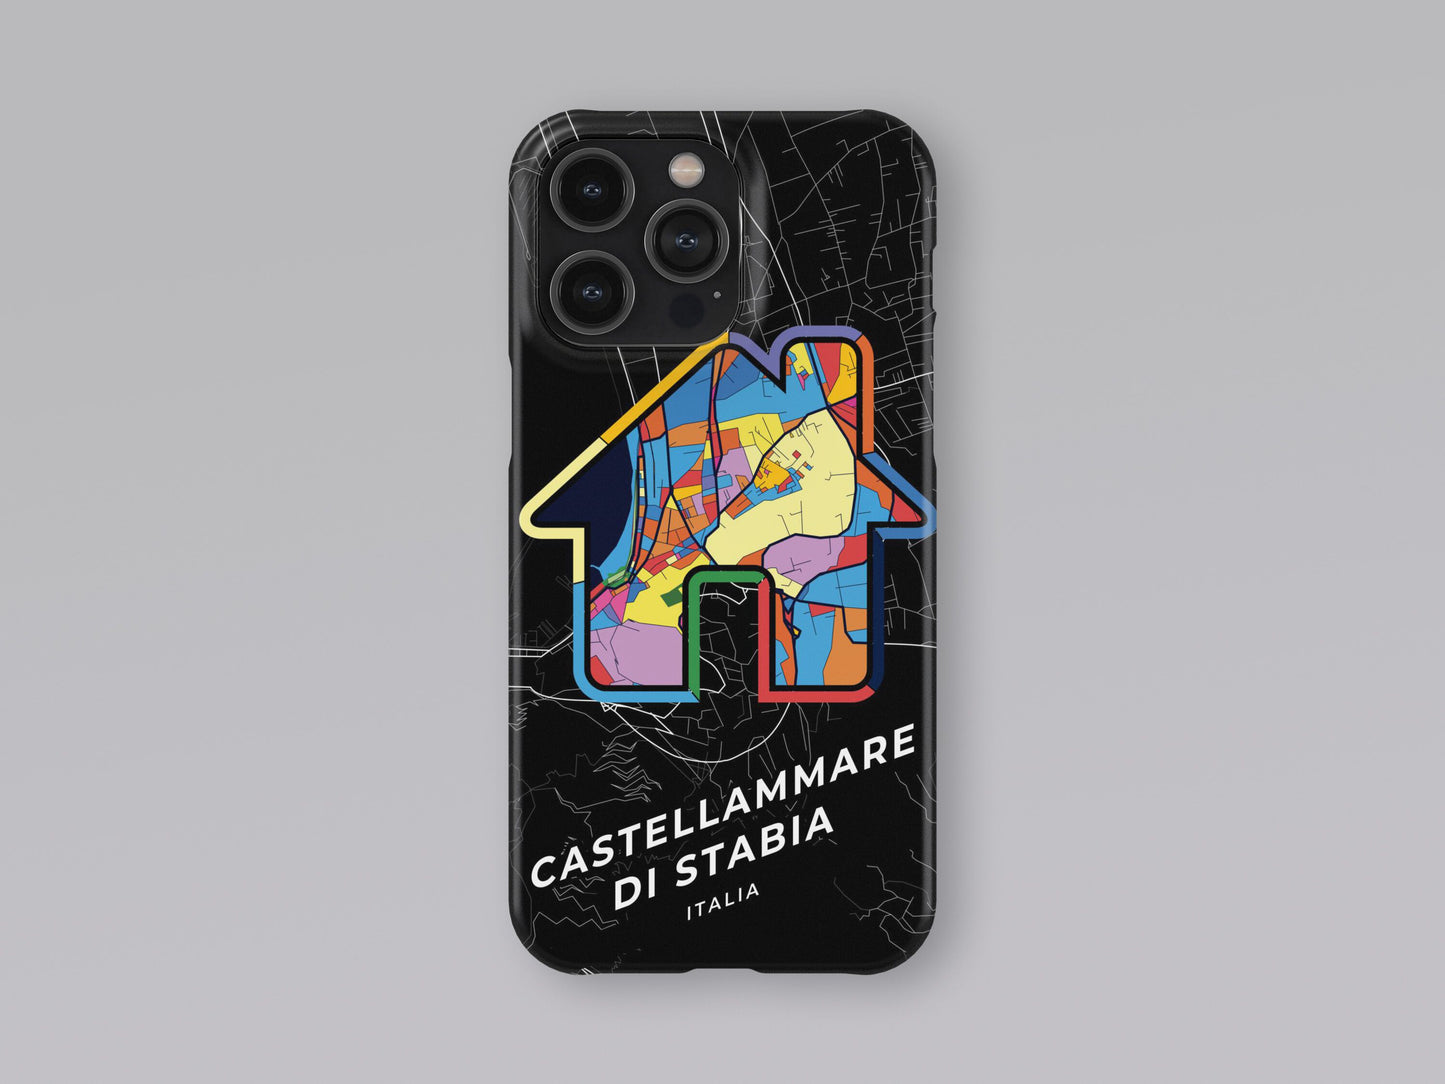 Castellammare Di Stabia Italy slim phone case with colorful icon. Birthday, wedding or housewarming gift. Couple match cases. 3